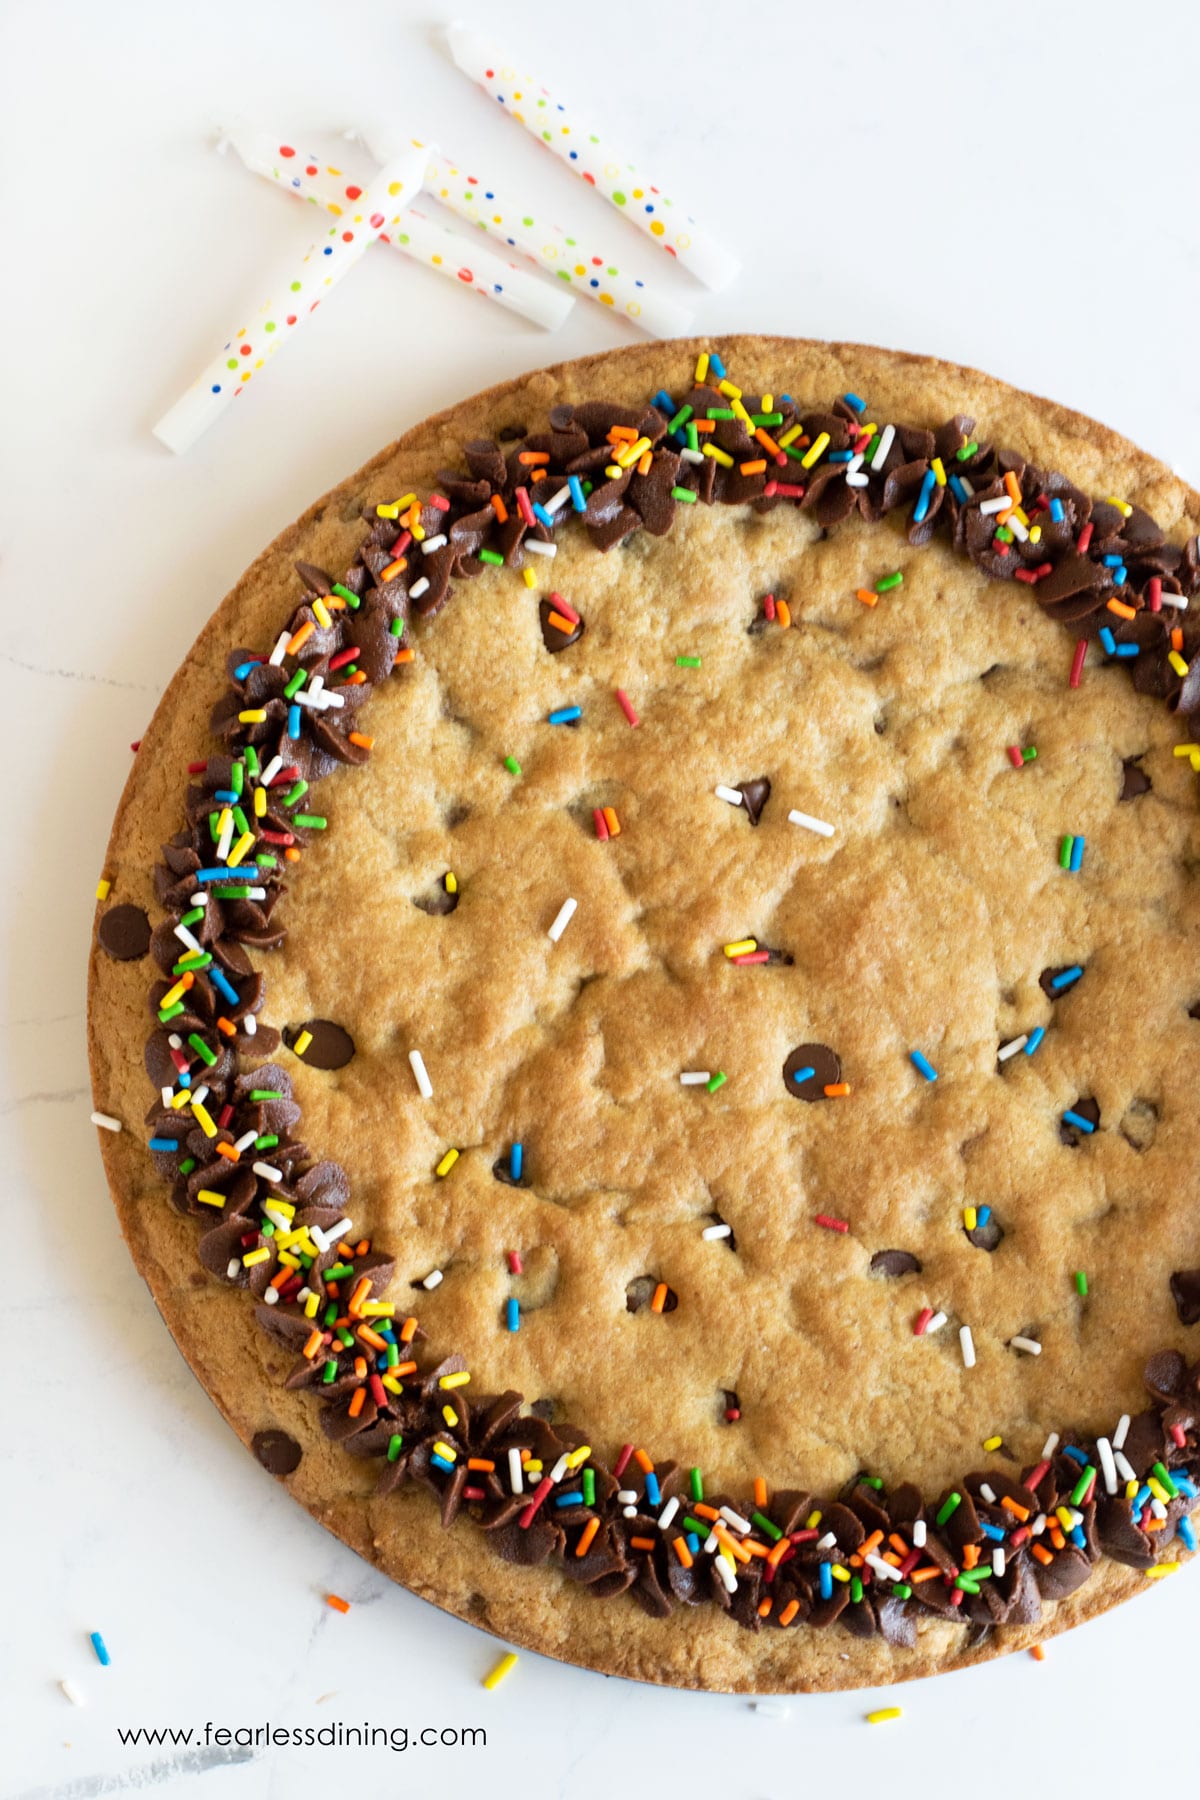 The top view of the decorated cookie cake.